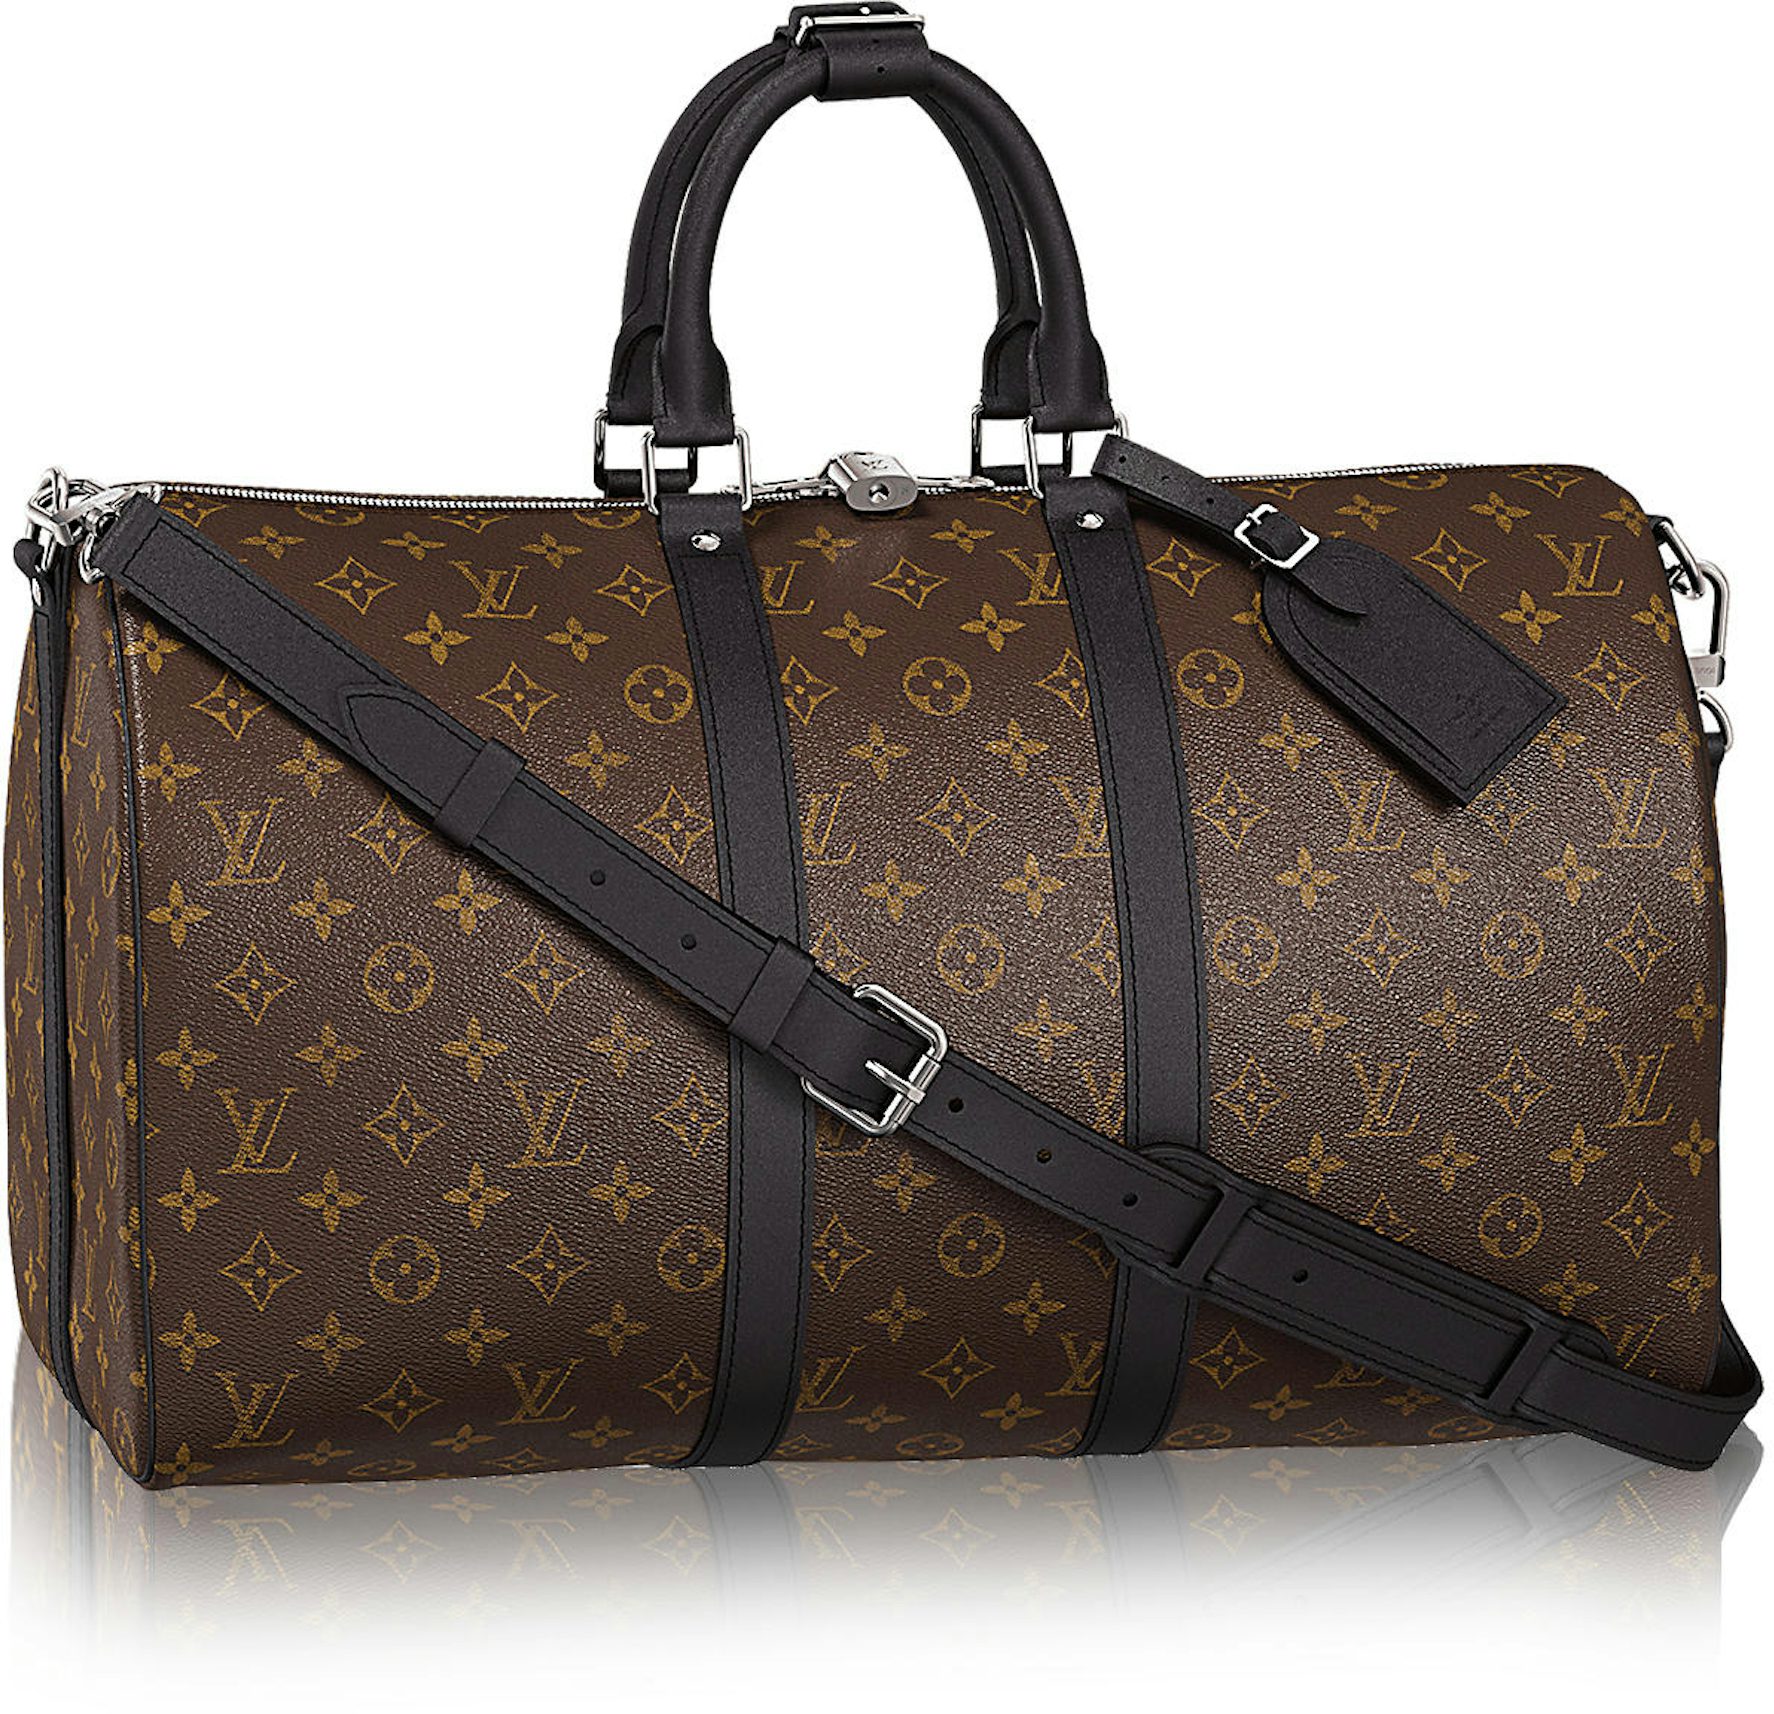 Only 878.00 usd for LOUIS VUITTON Monogram Macassar Keepall Bandoulière 45  Online at the Shop